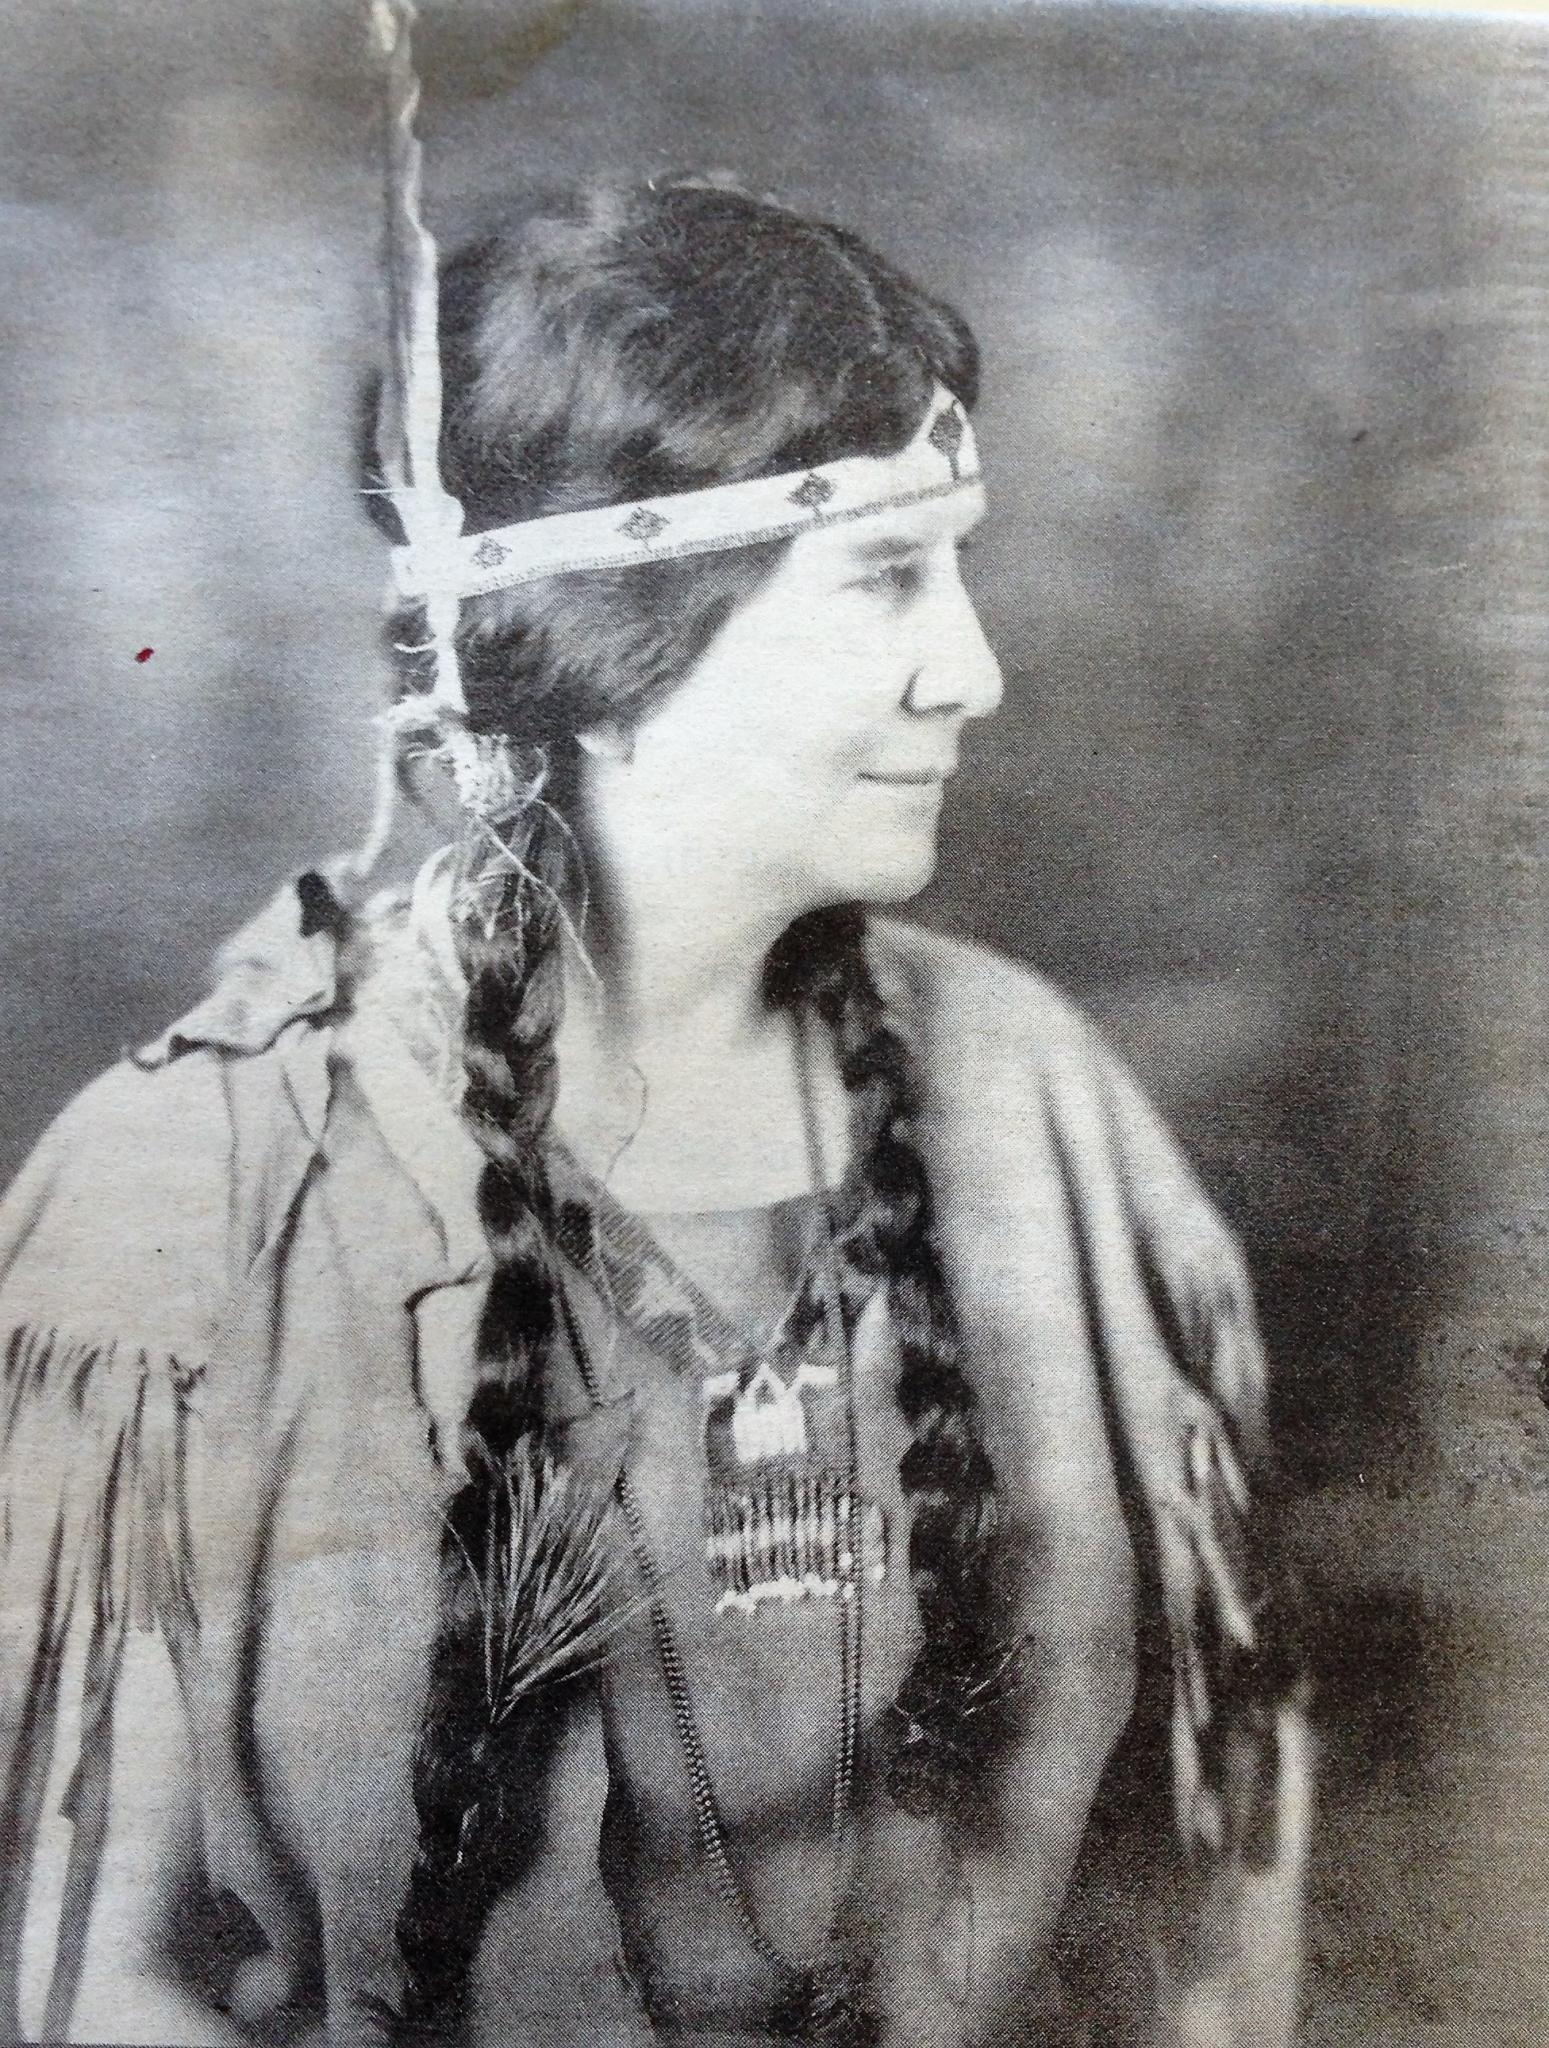 Photo from the Patterson Library Archives of Mabel Powers dressed in her Indian garb that she wore when she told Indian stories and sang songs at her Indian Fire Circle at Wahmeda on Chautauqua Lake